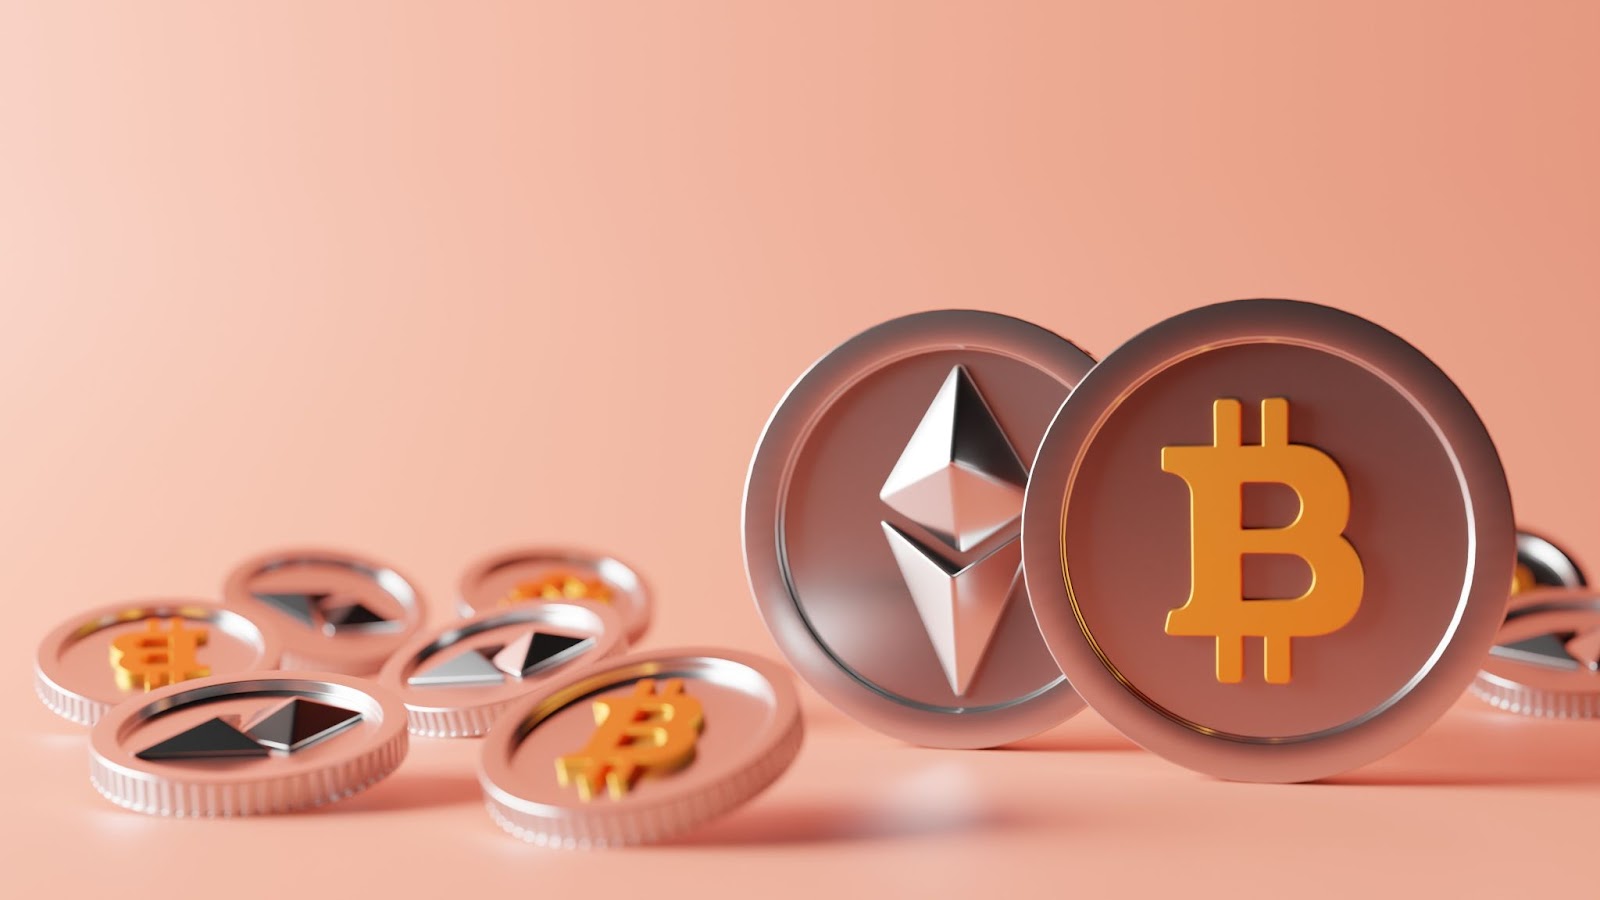 Bitcoin and Ethereum coins are cryptocurrencies